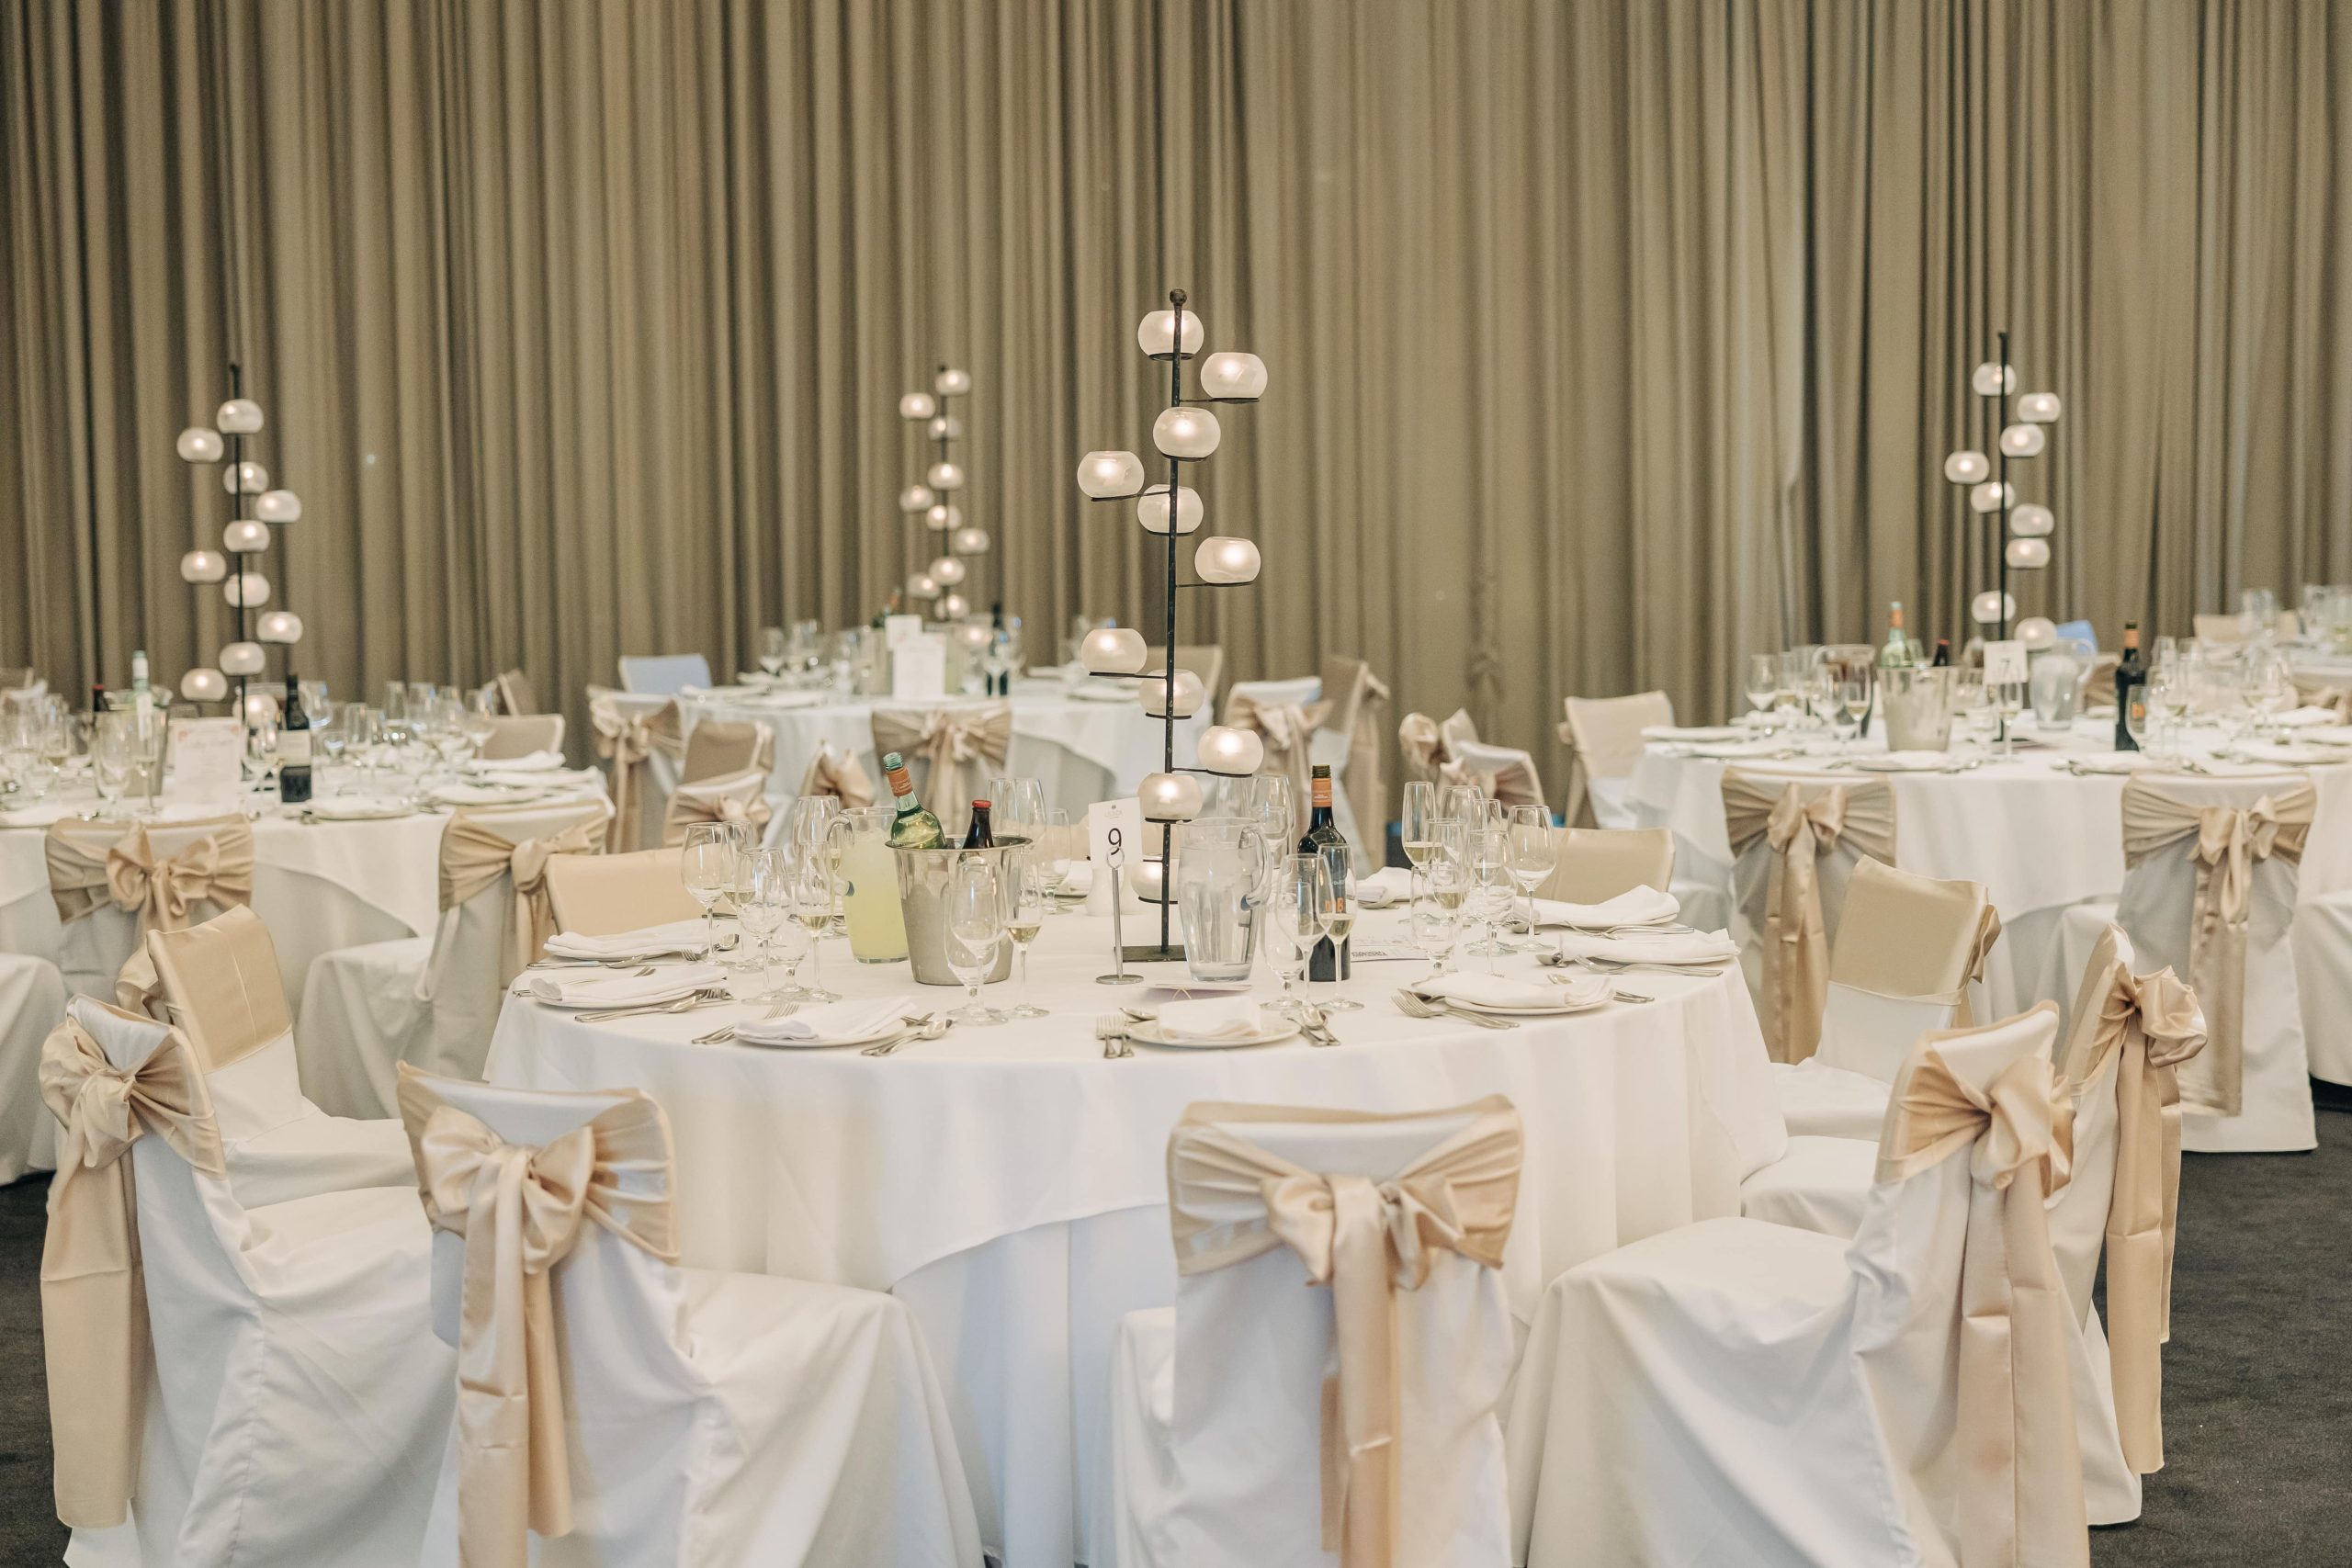 A timeless ballroom set with fresh white linen and chairs with gold sashes, perfect for an event in Melbourne